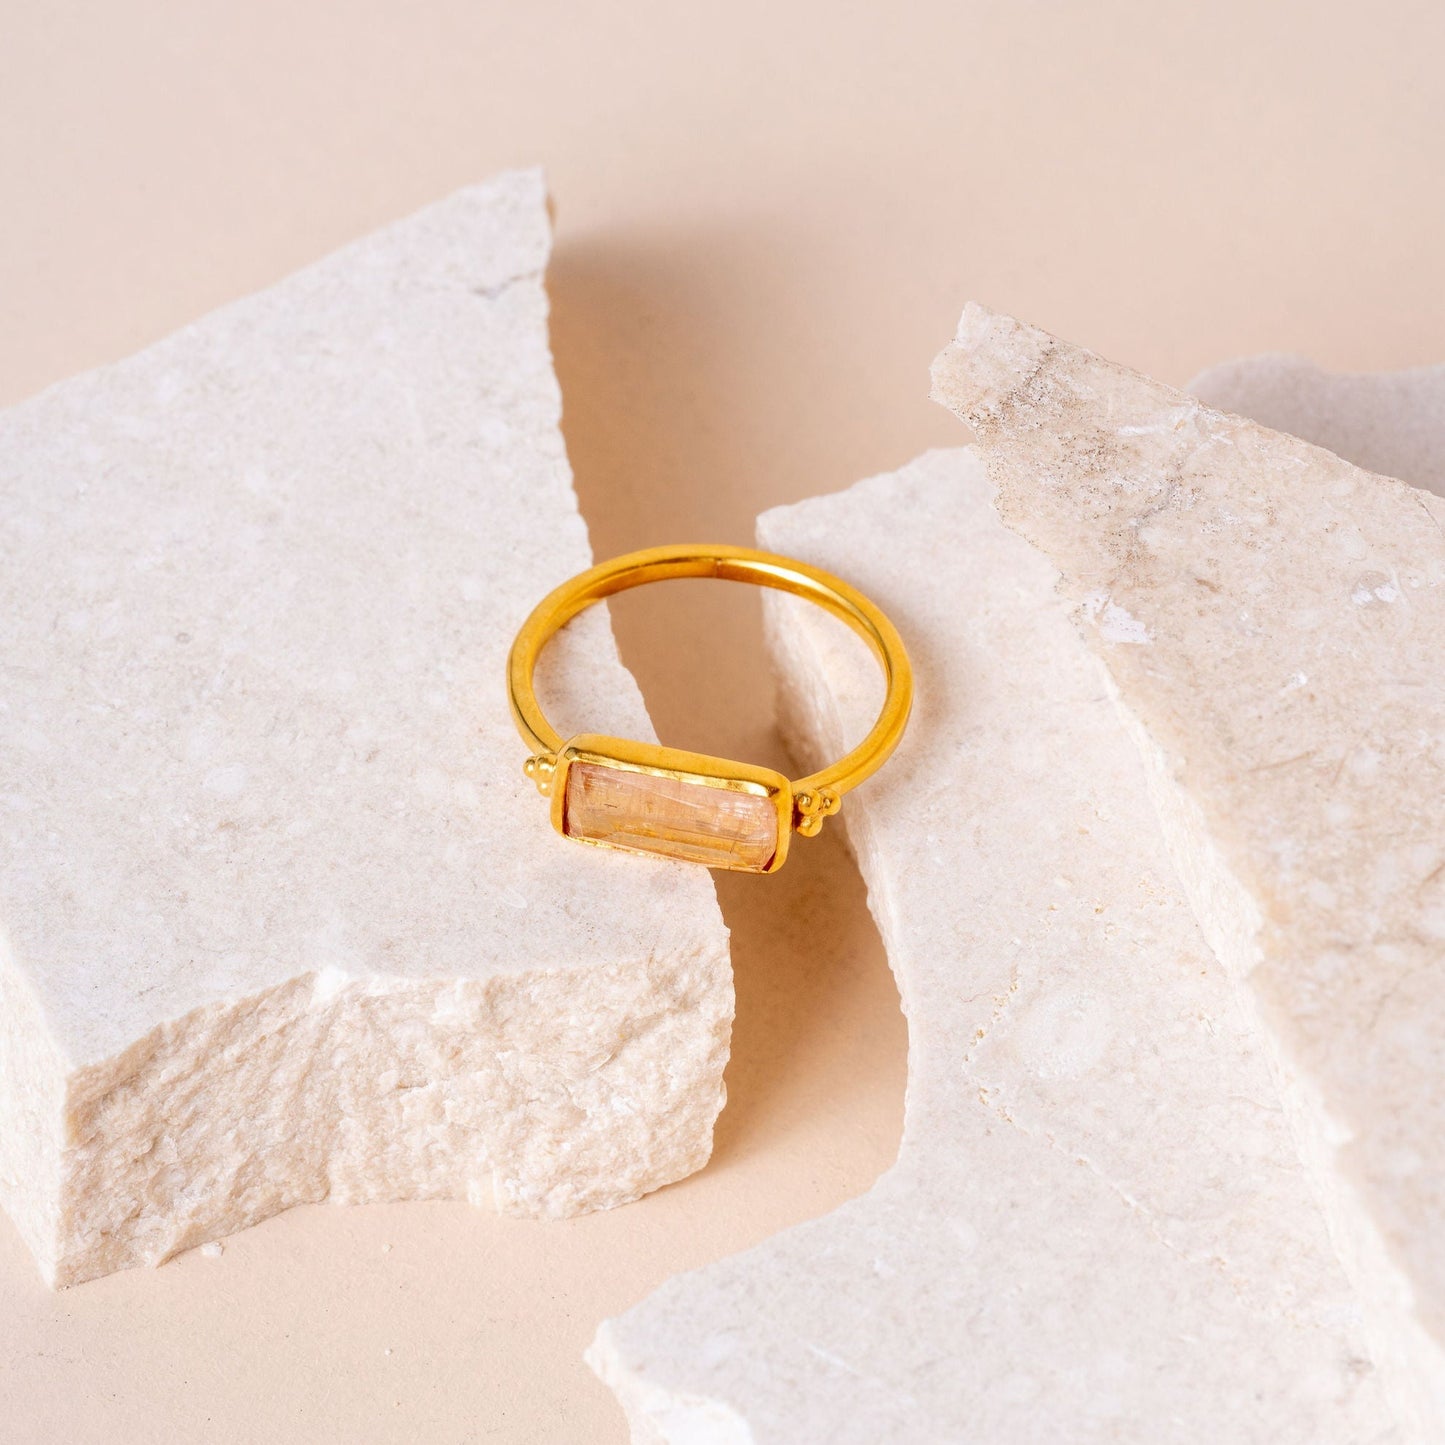 Distinctive artisan ring with granulation detail and a yellow gemstone.